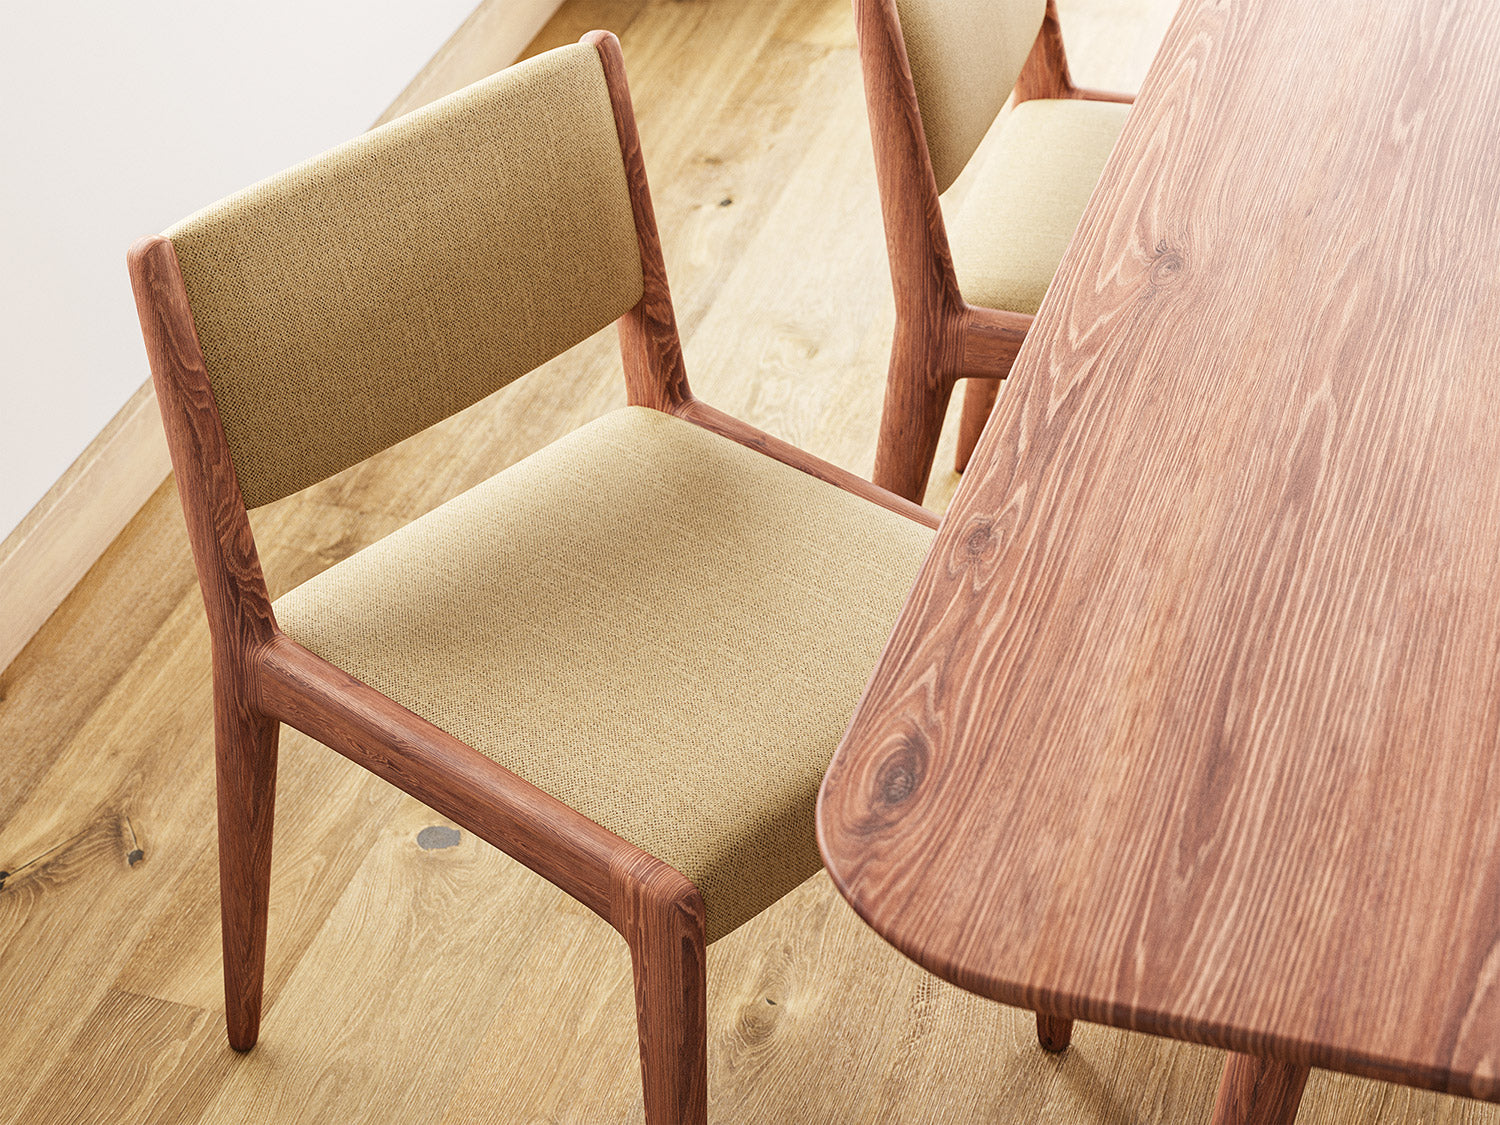 G: Low back version in walnut wood and Smart Wheat fabric with the Voya Rectangular Dining Table in walnut wood